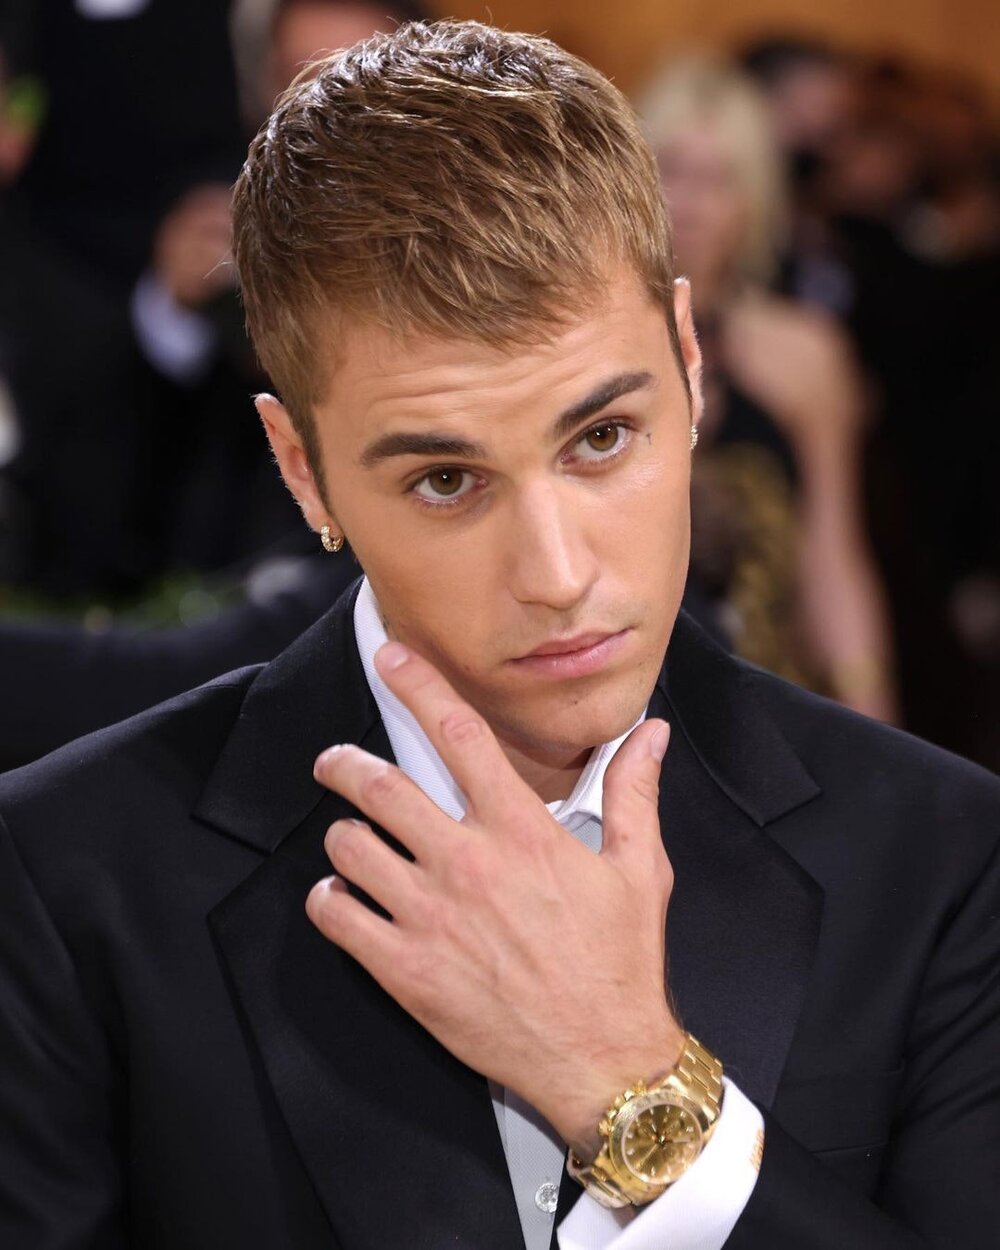 Watch Spotting: Celebrities who wore their own watches to the Met Gala —  Rescapement.